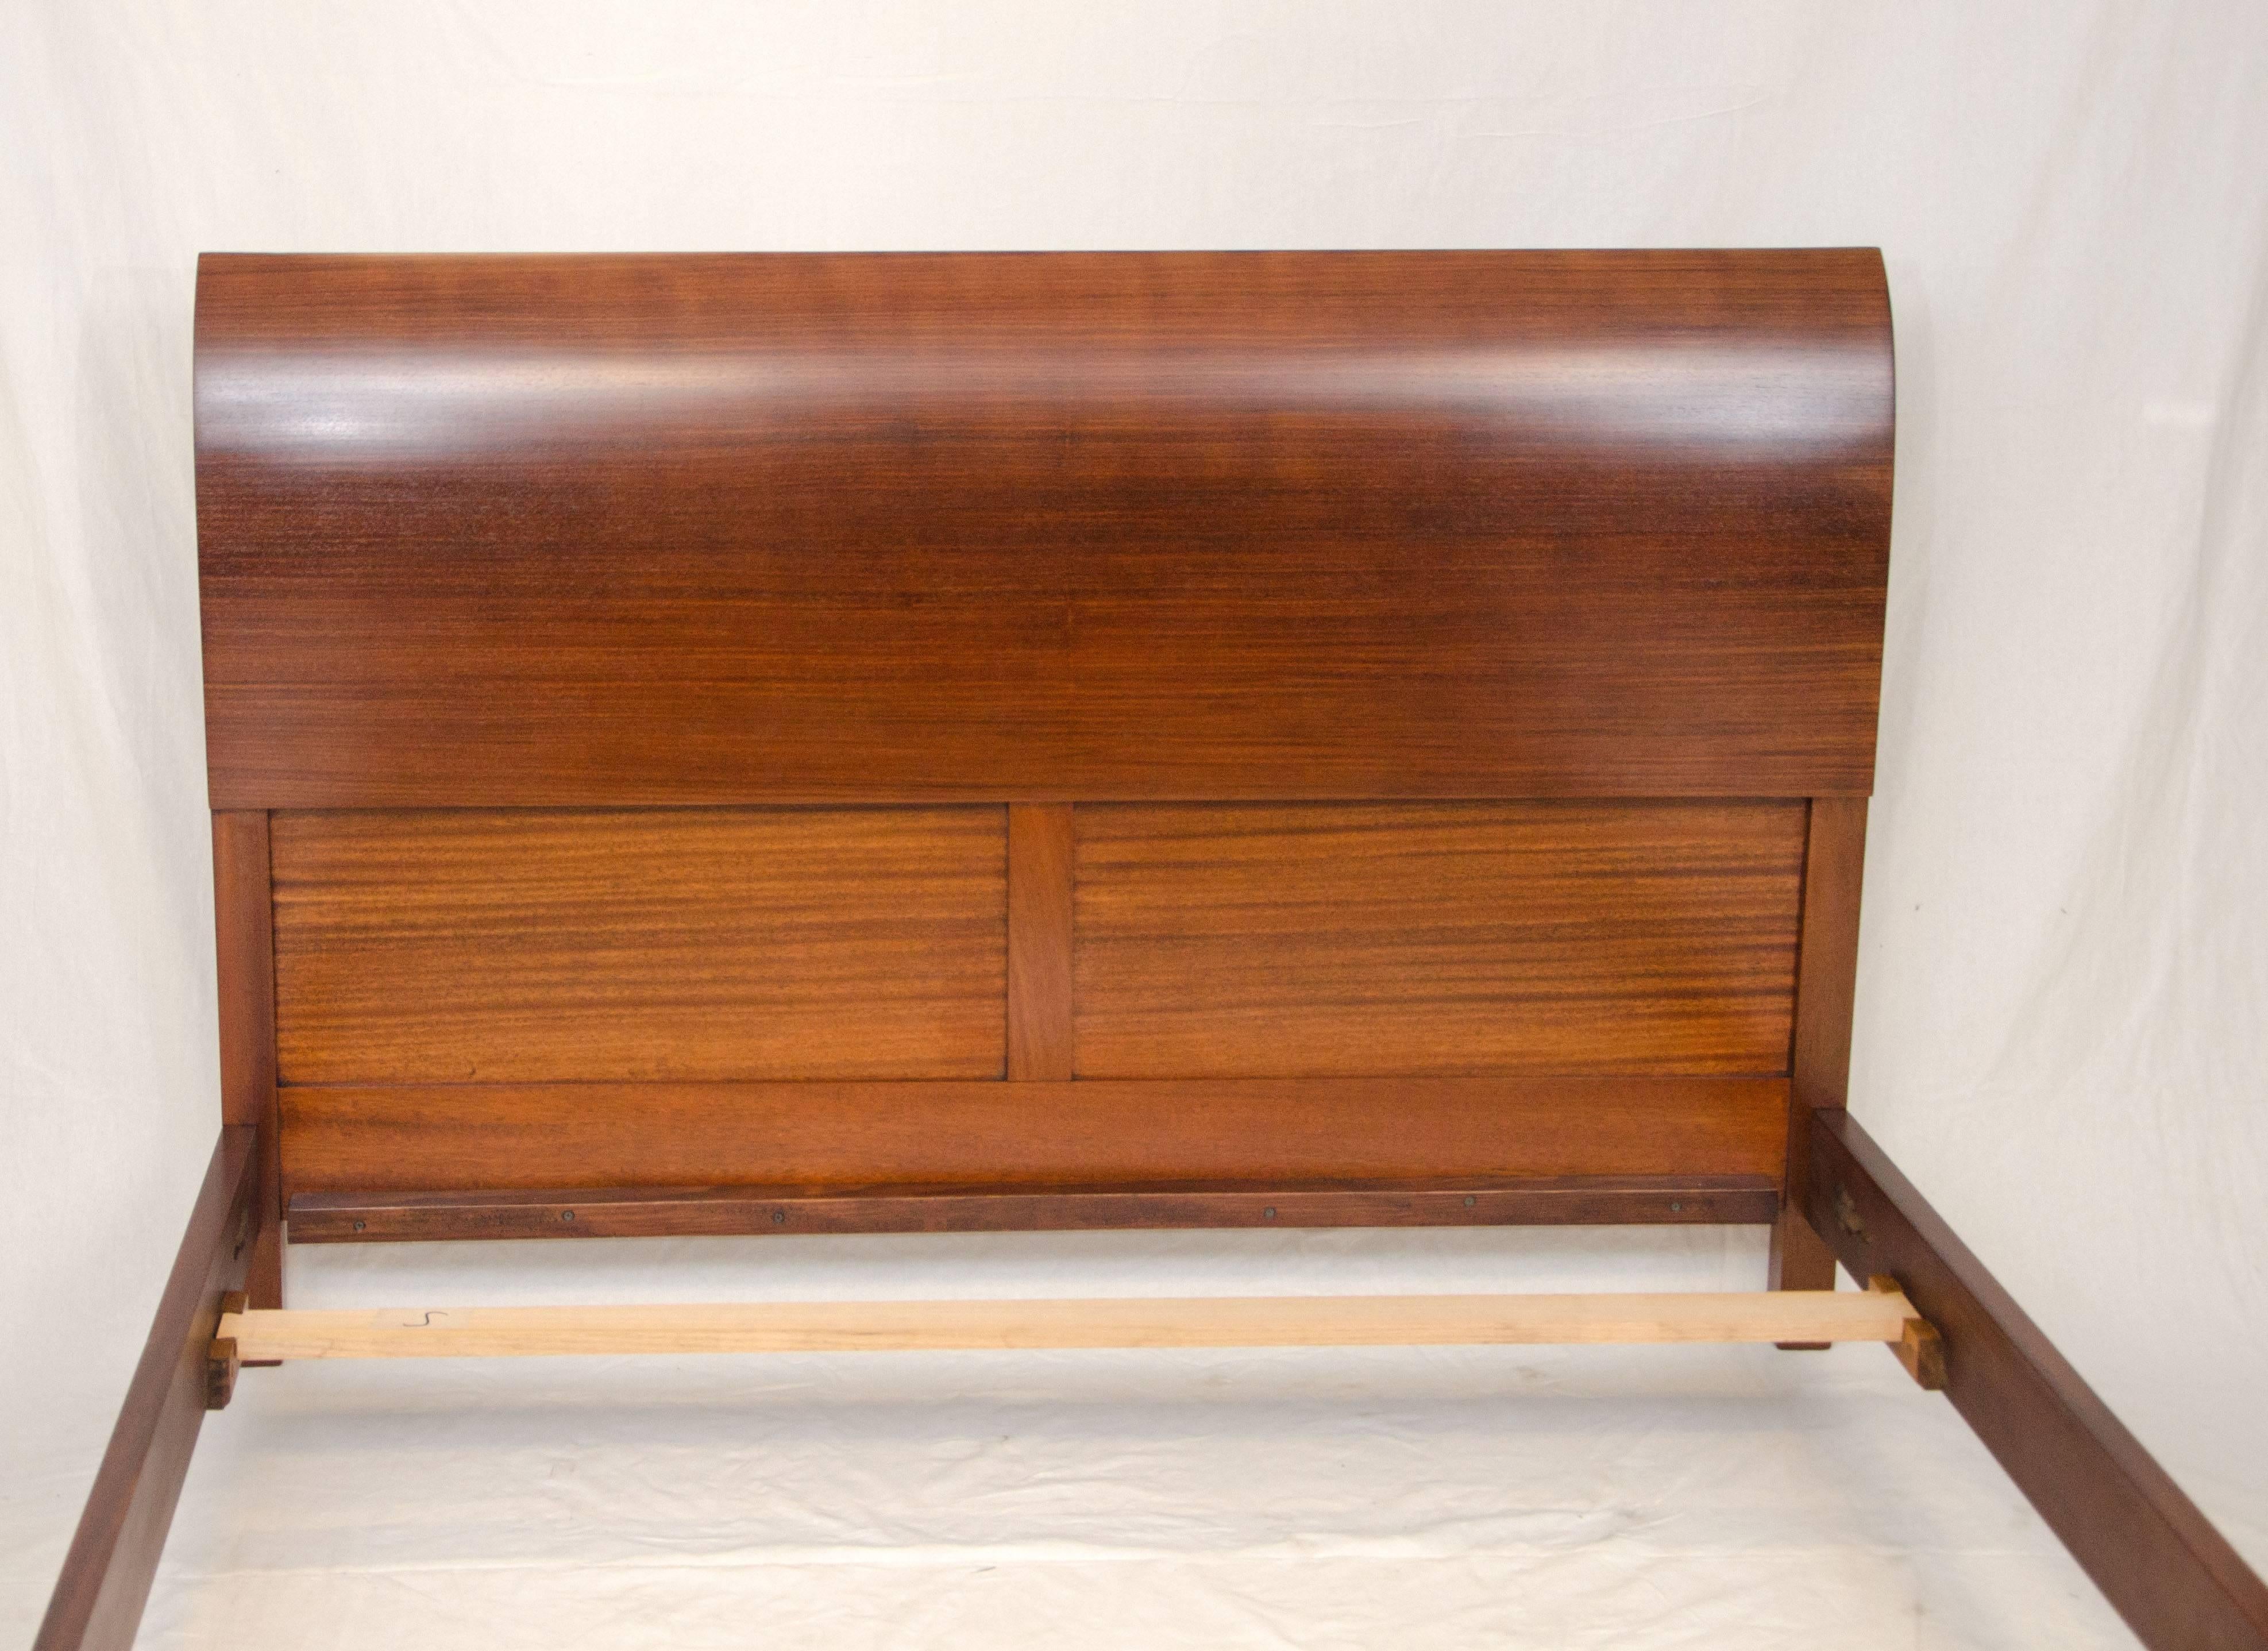 French Art Deco European Queen Size Bed, Rosewood In Excellent Condition For Sale In Crockett, CA